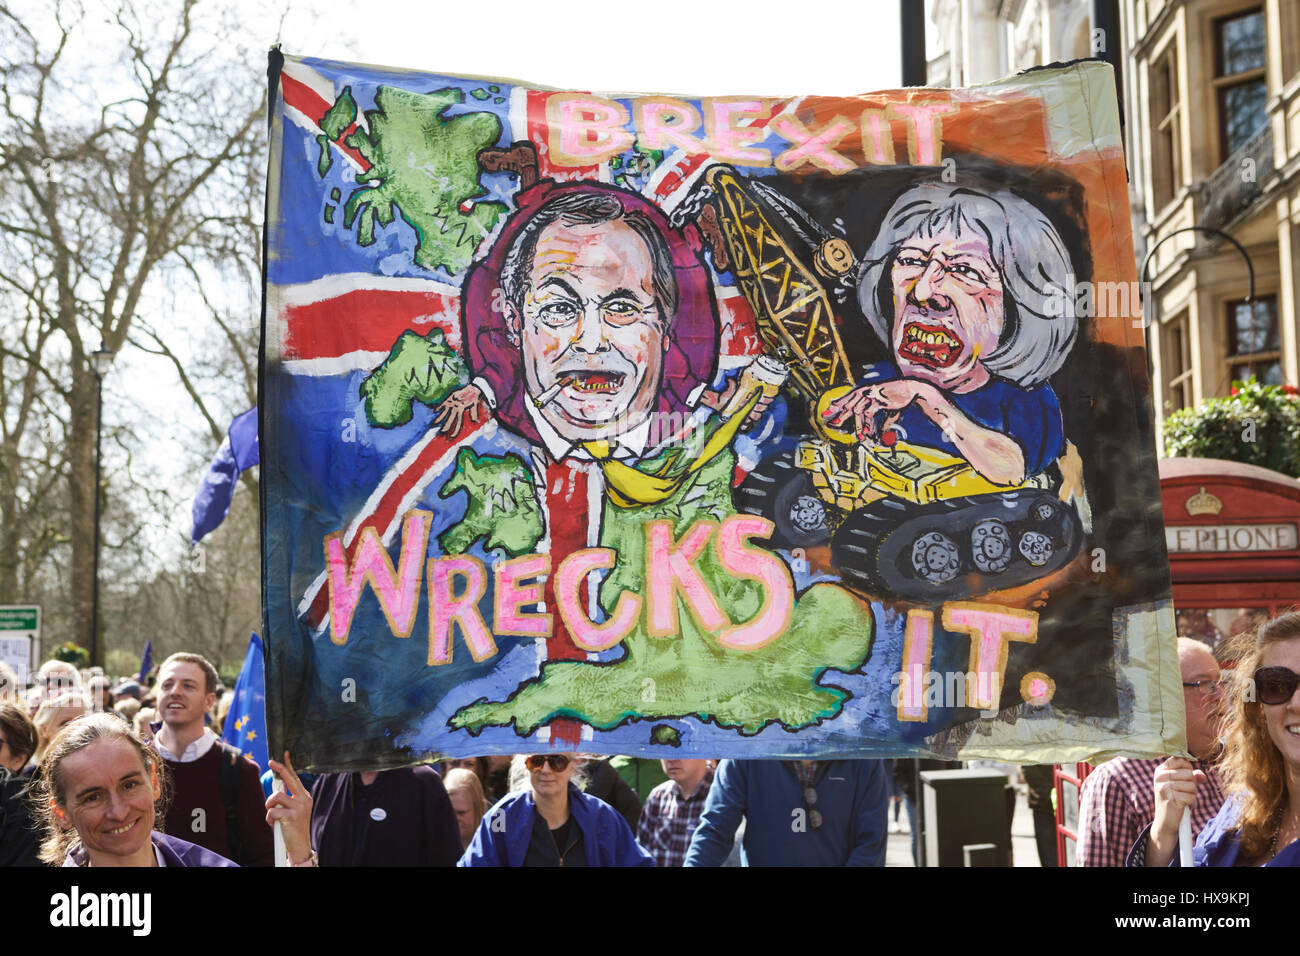 London, UK. 25th March 2017. Unite for Europe organised a Pro EU march in London. Anti-BREXIT demonstrators march from Park Lane to Parliament Square. Brexit protest. Credit: Tony Farrugia/Alamy Live News Stock Photo